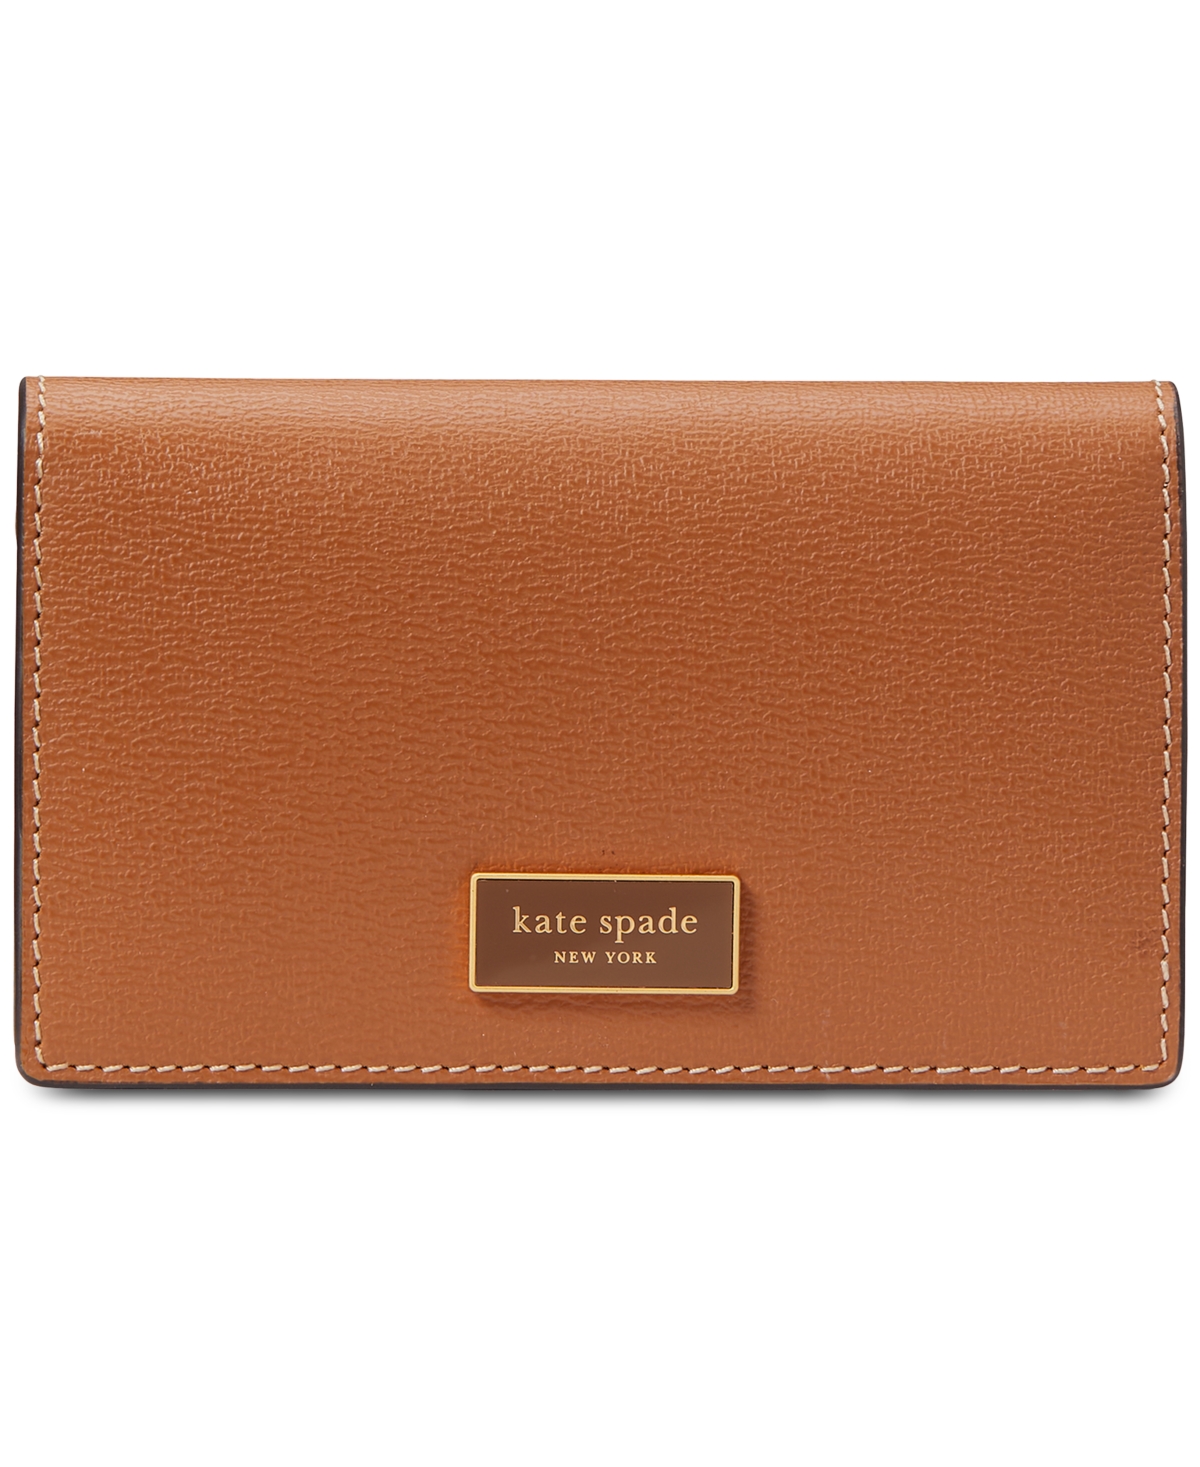 KATE SPADE KATY TEXTURED LEATHER SMALL BIFOLD SNAP WALLET